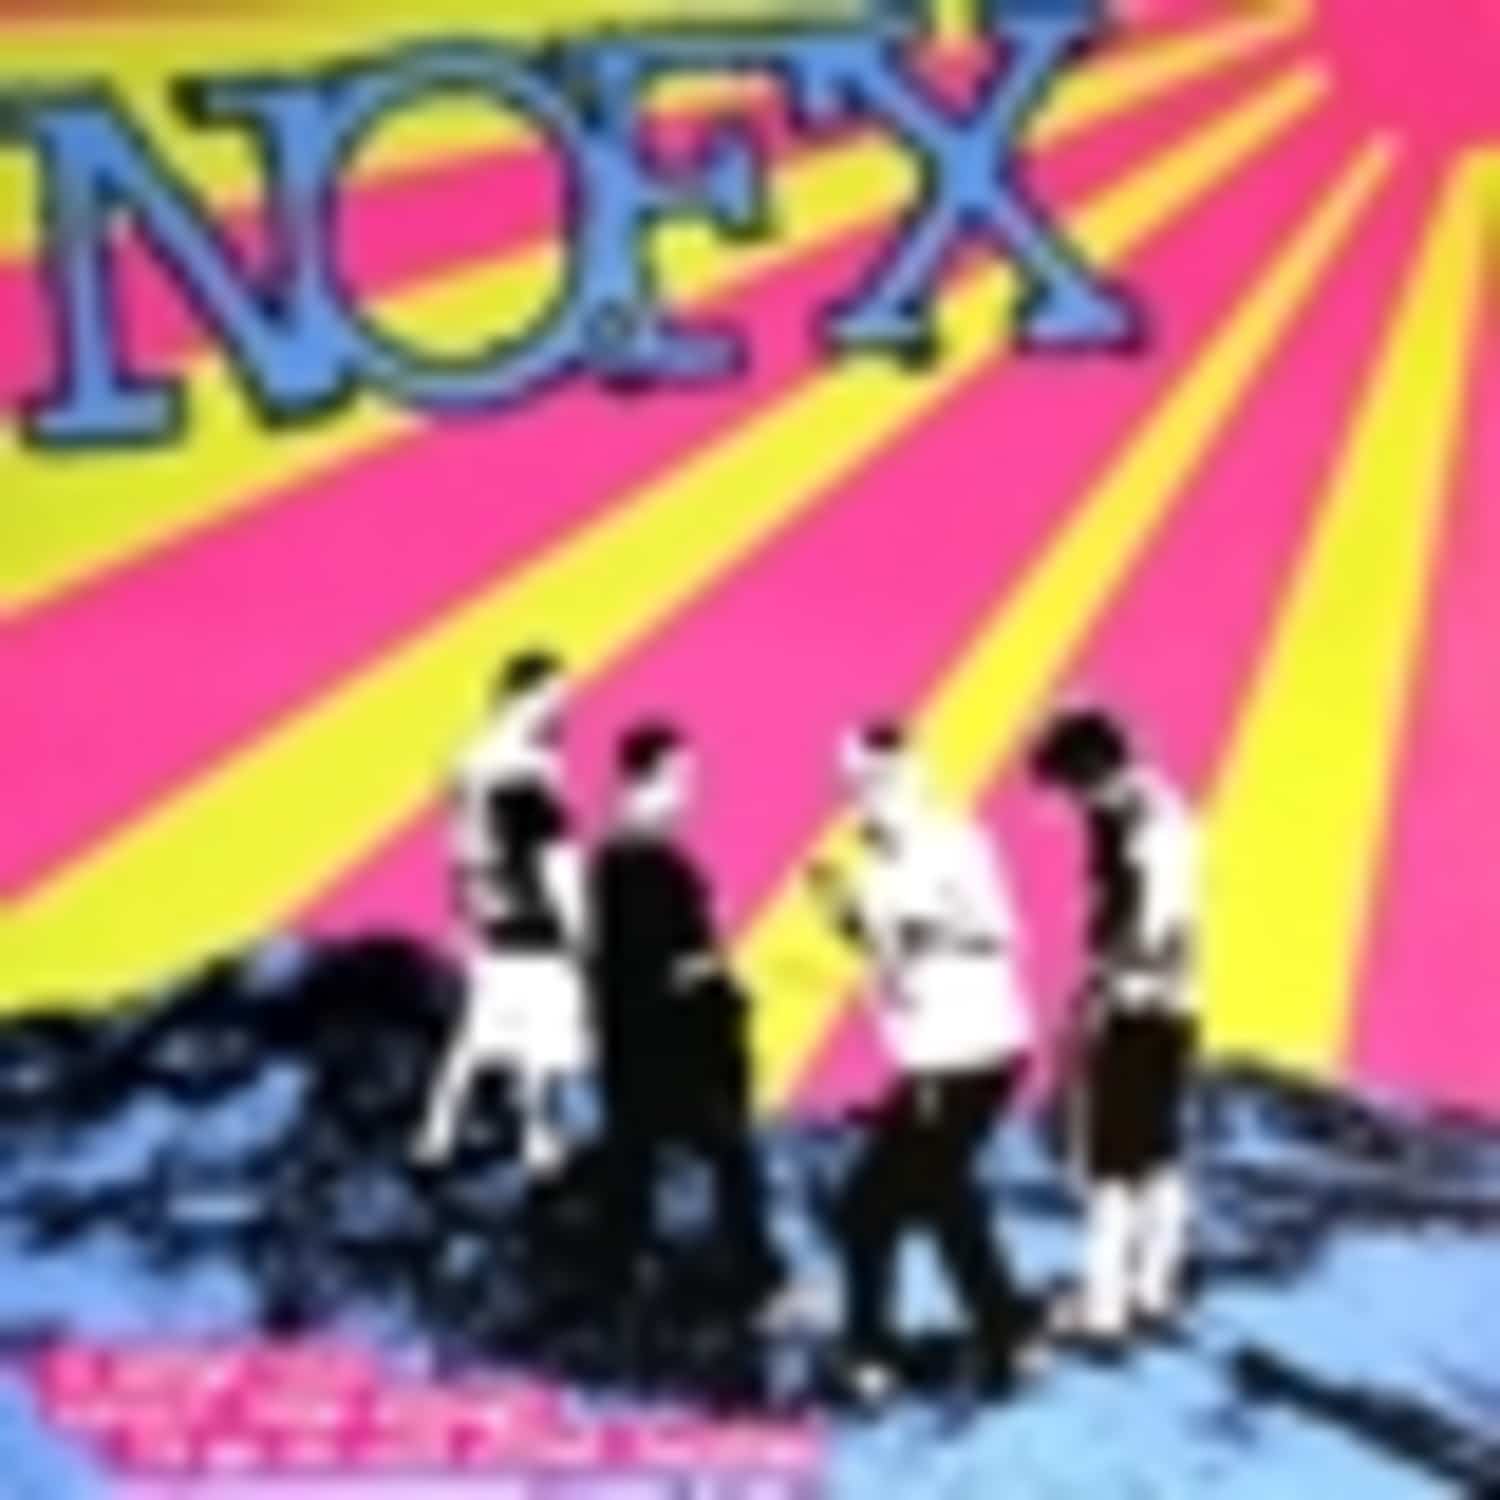 NOFX - 22 SONGS THAT WERENT GOOD 